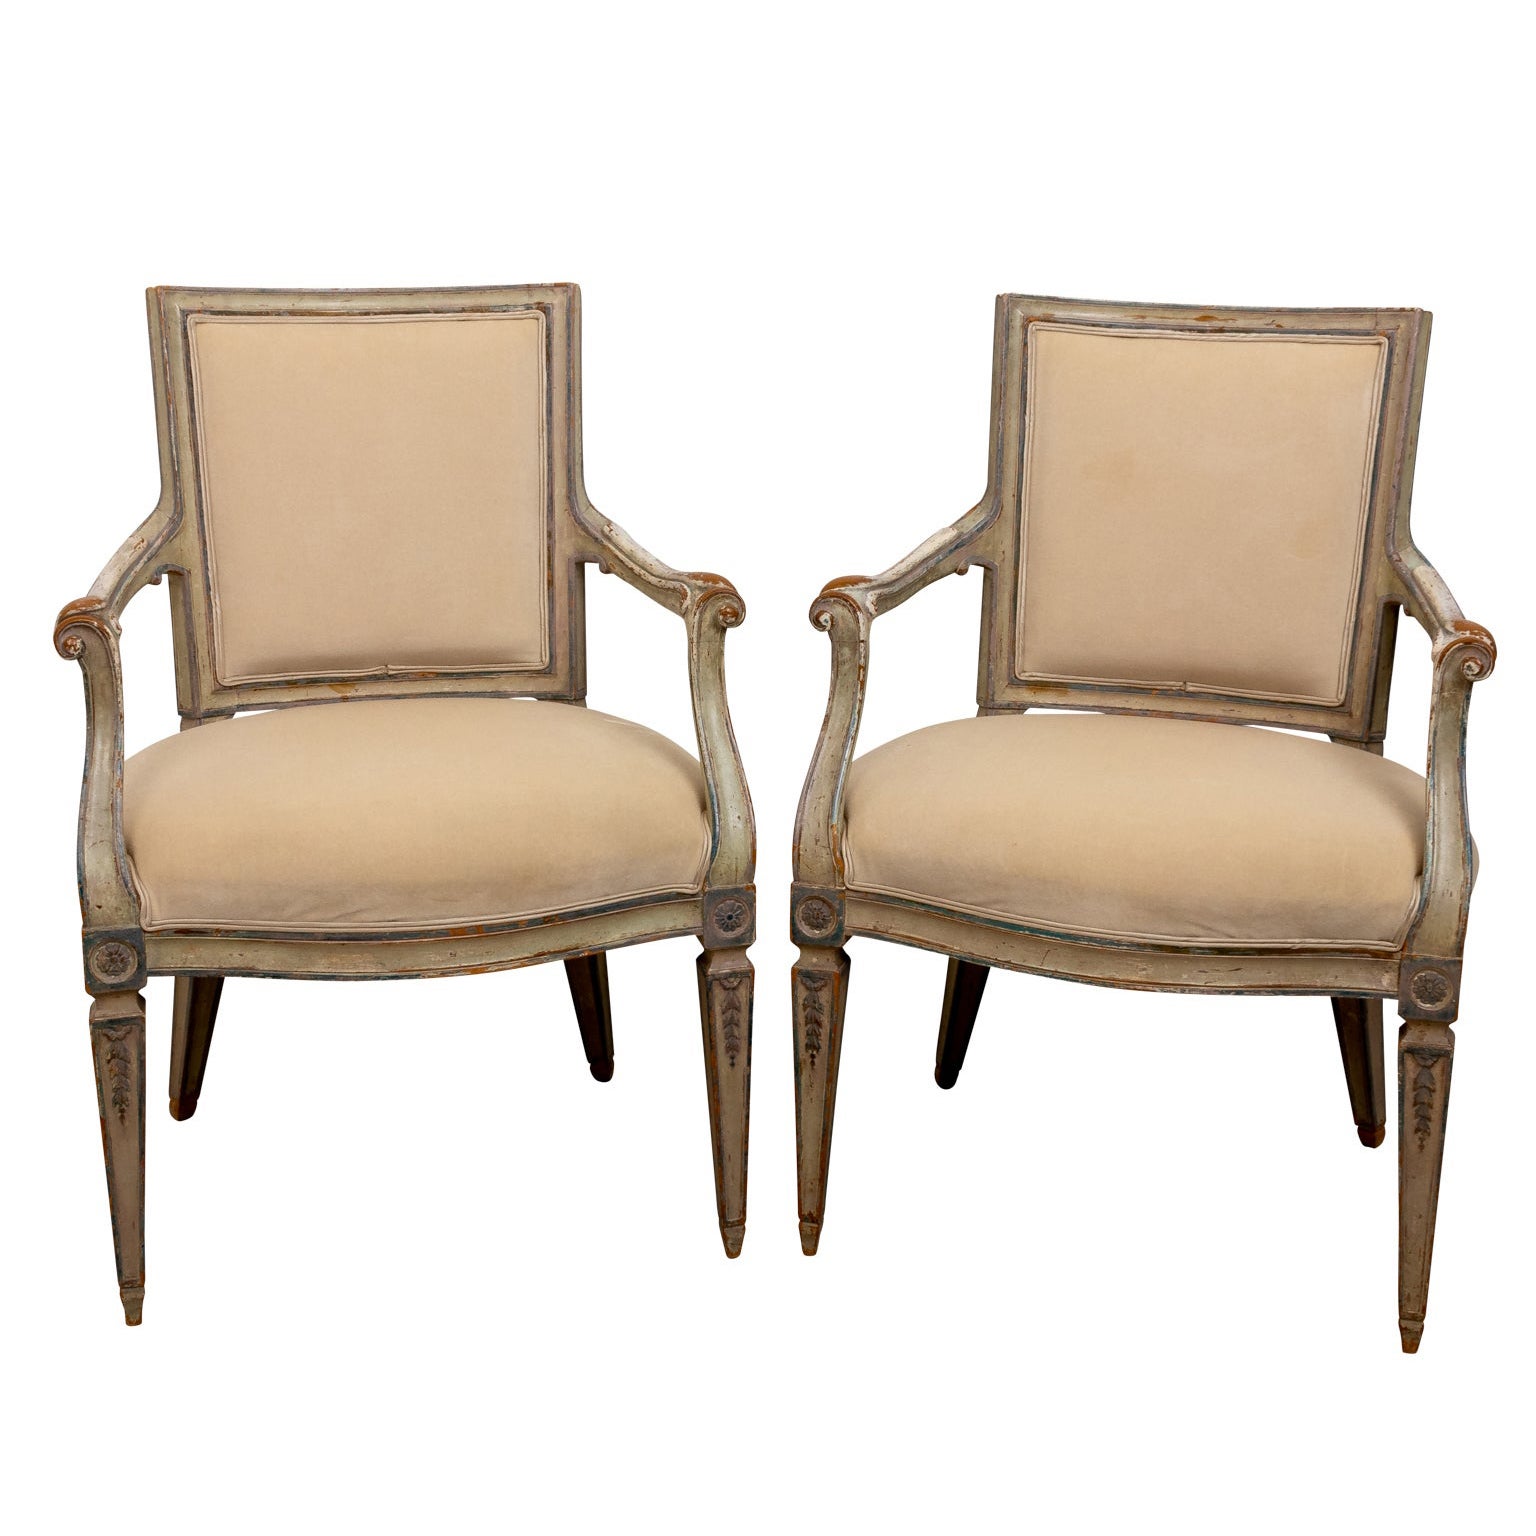 Pair of Louis XVI Style Painted Upholstered Fauteuils